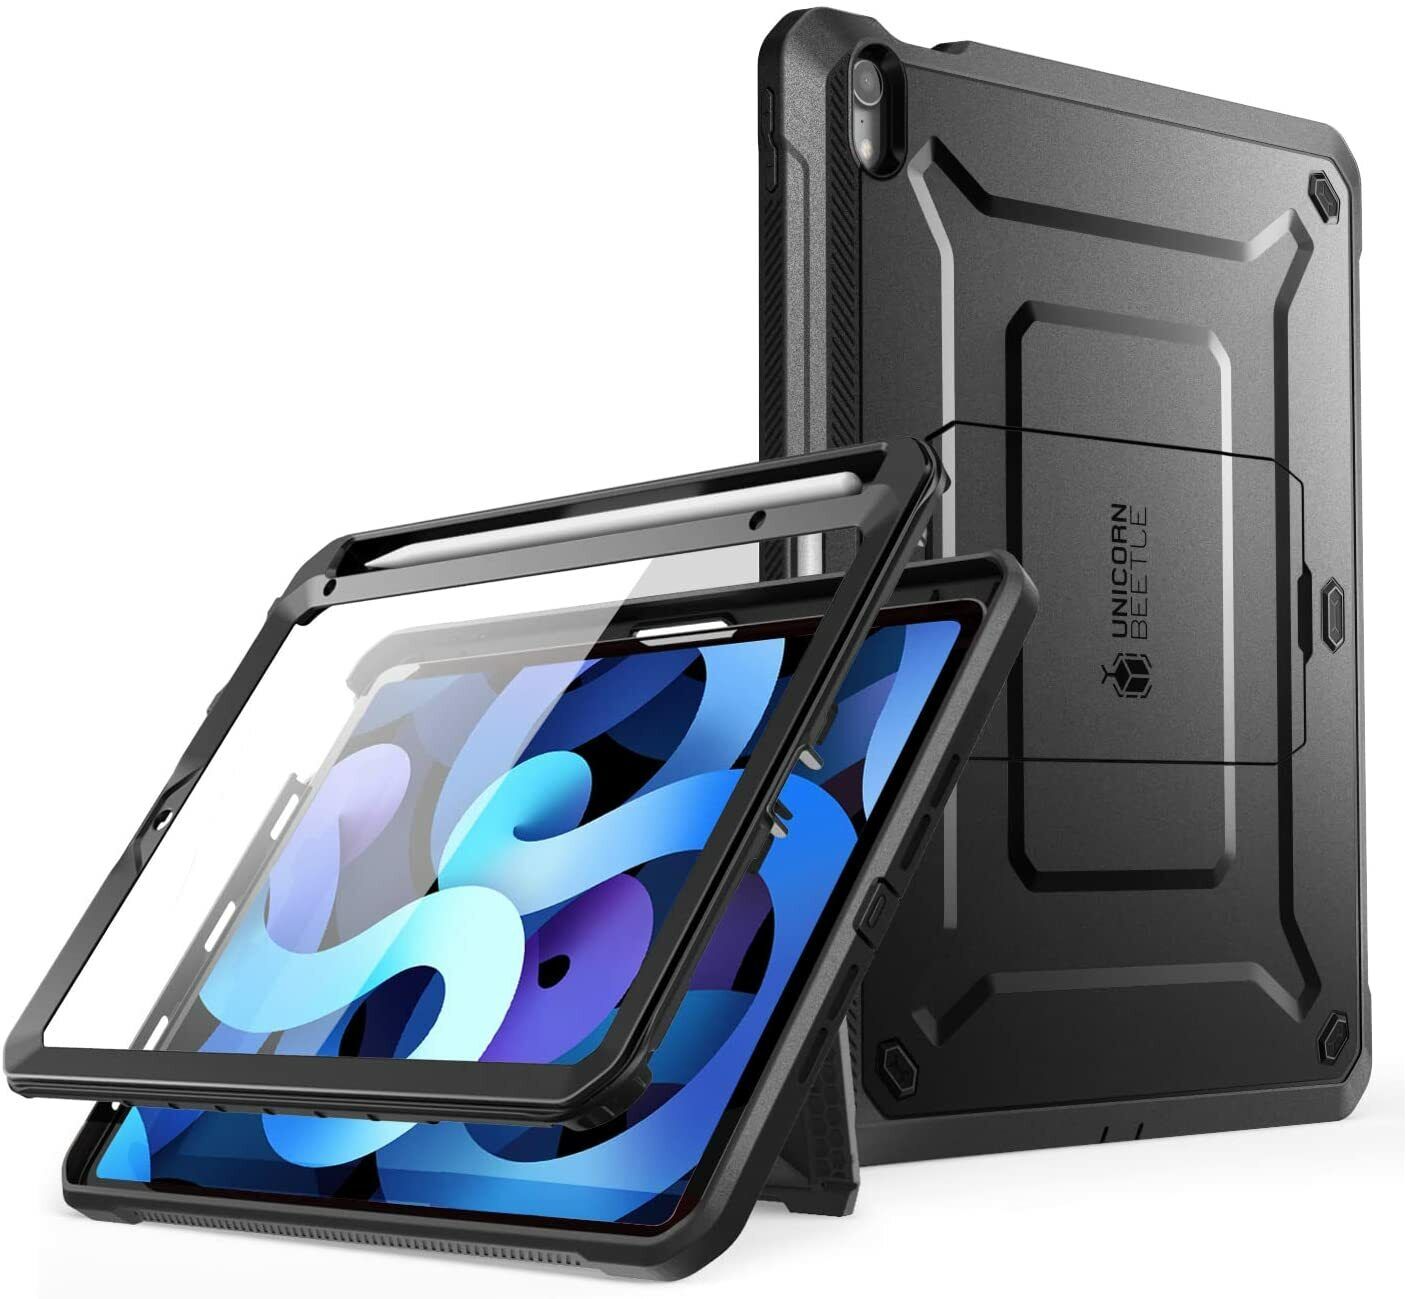 SUPCASE For iPad mini 6 Built-in Screen Protector Full-Body Rugged UBPro Case